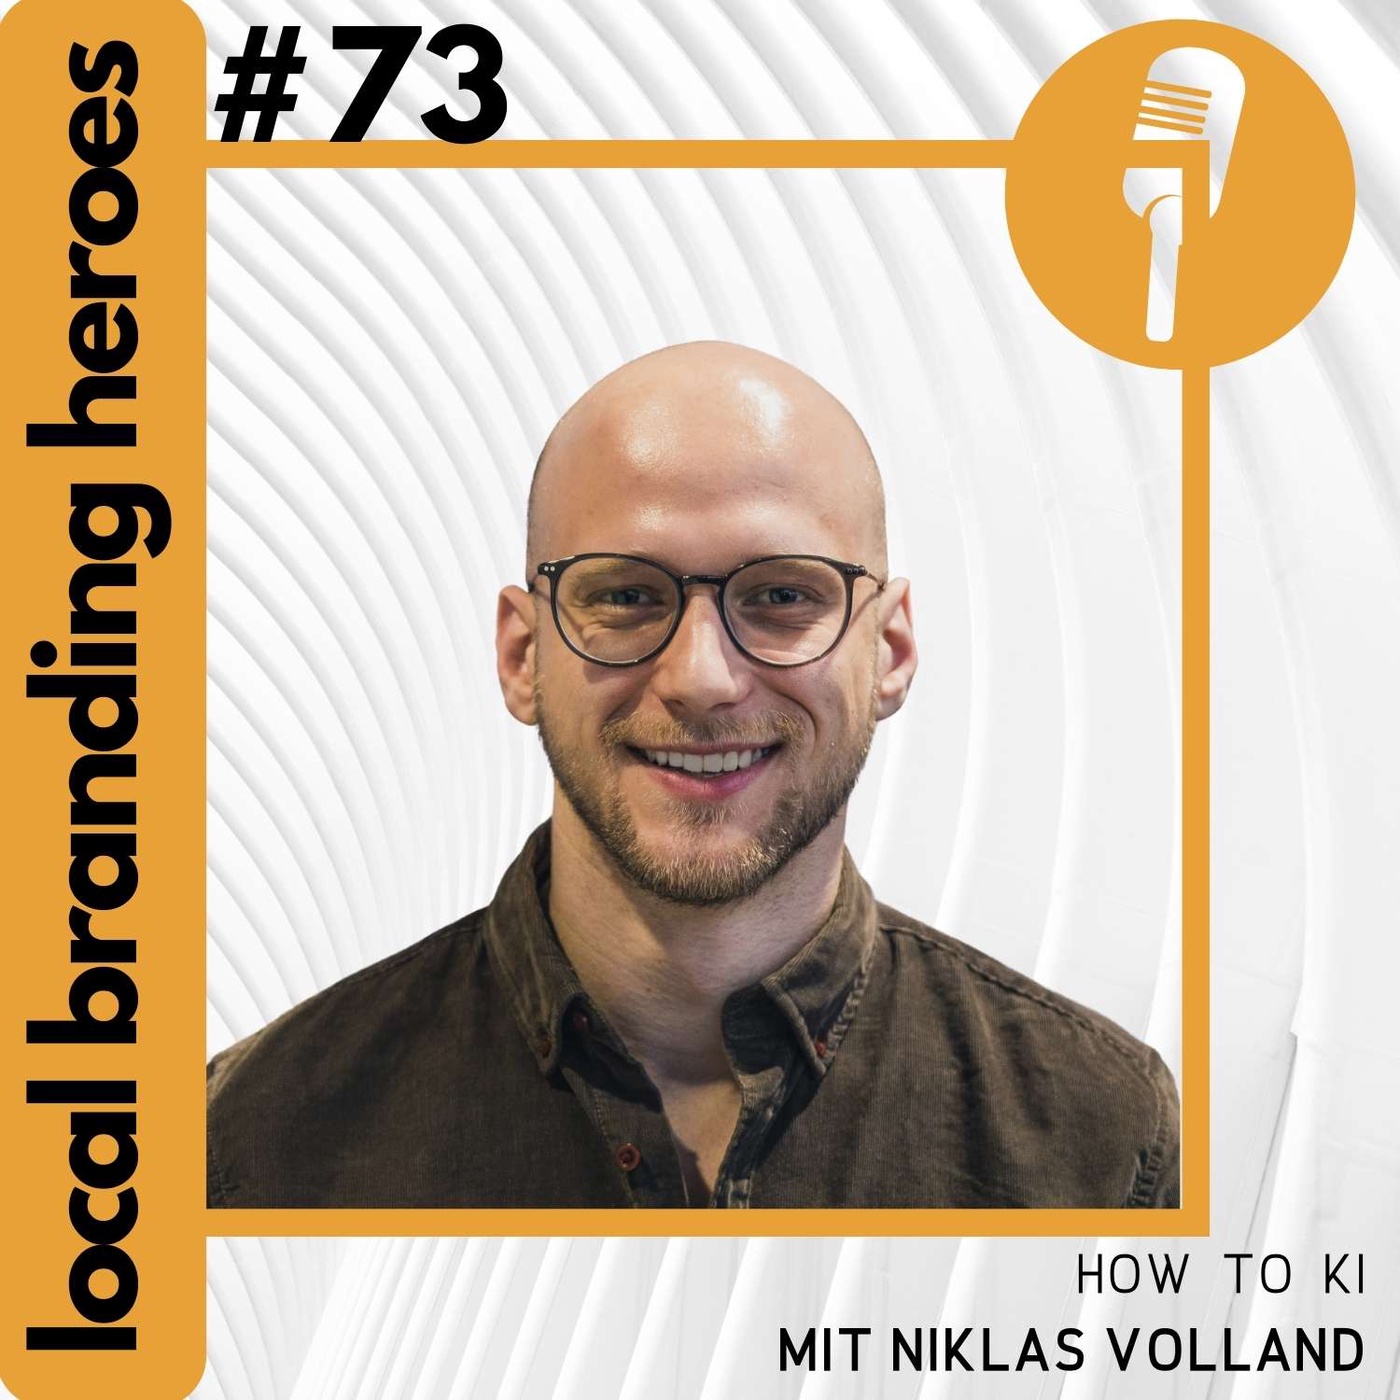 #73 Niklas Volland, Co-Founder & CEO Human bei BYTABO GmbH